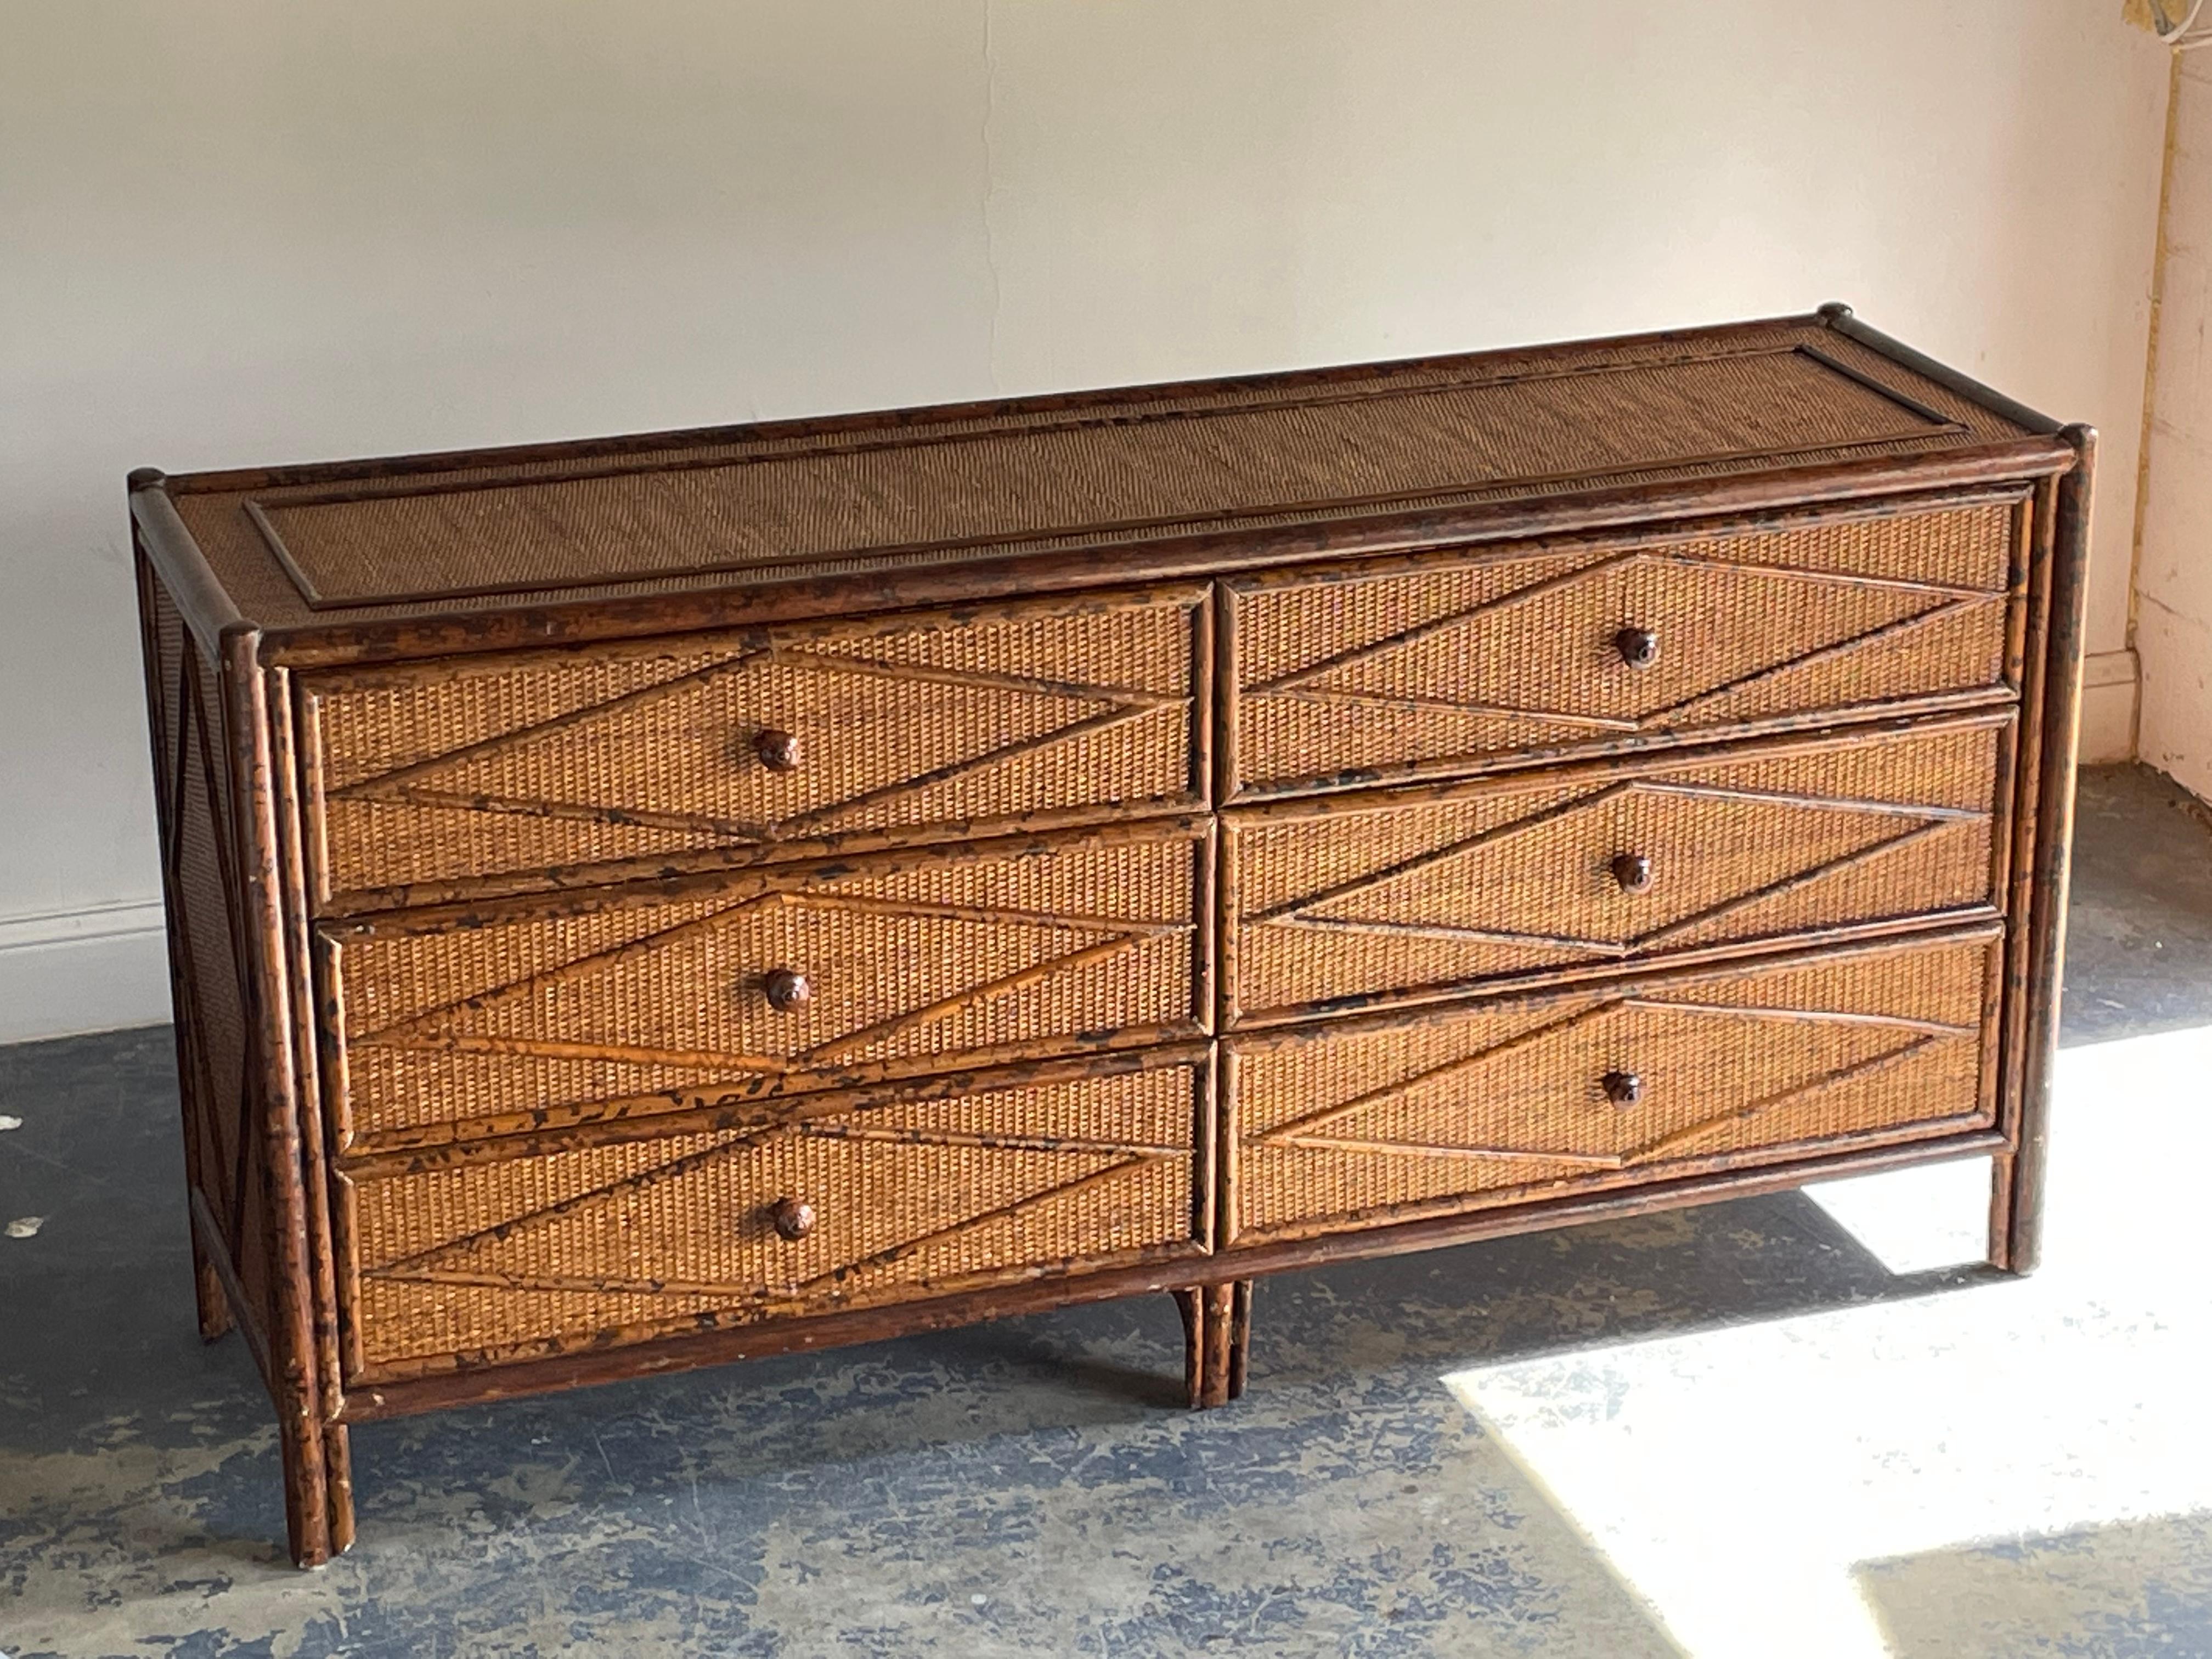 Vintage British colonial style dresser in bamboo and rattan. Six spacious drawers clad in rattan with a burnt or tortoise bamboo skeleton. Wonderful diamond pattern throughout.